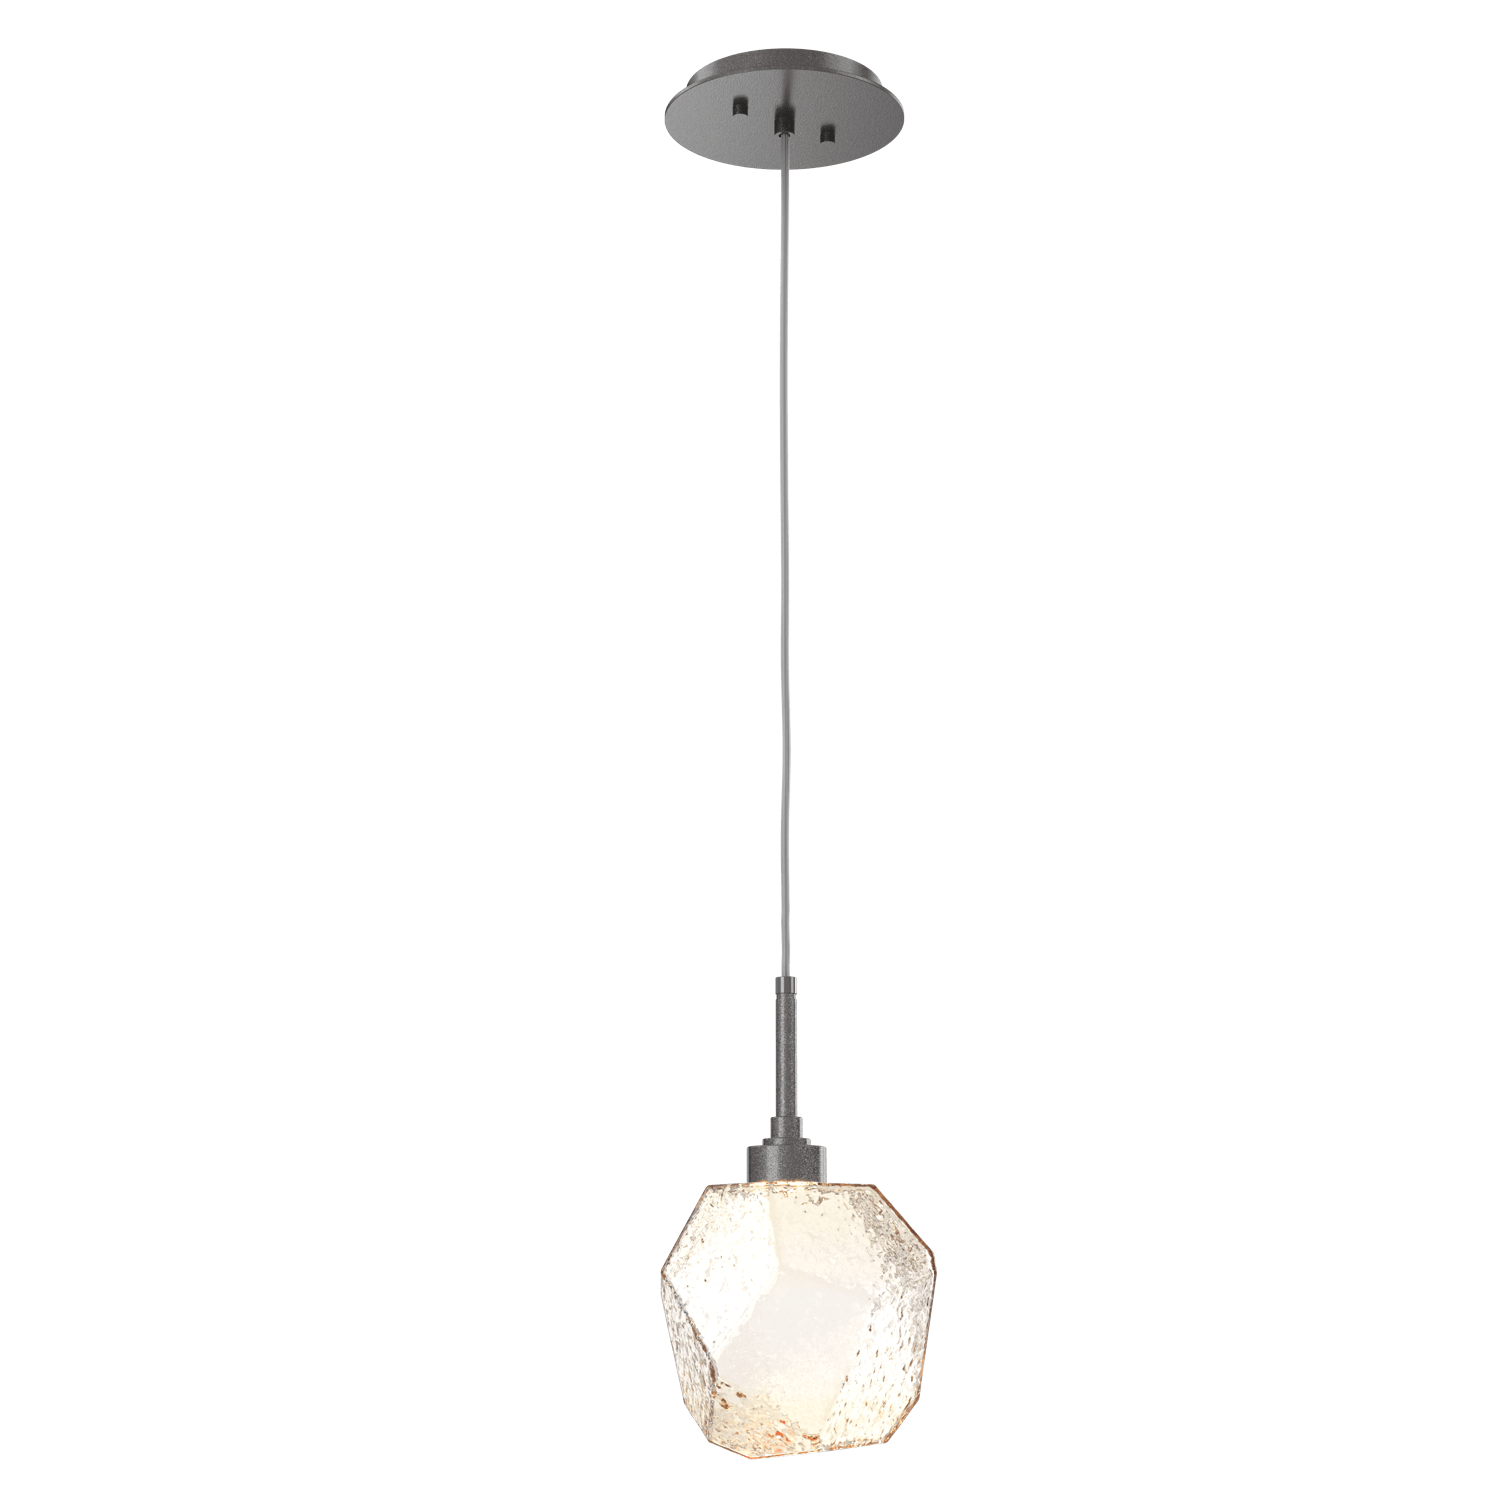 LAB0039-01-GP-A-Hammerton-Studio-Gem-pendant-light-with-graphite-finish-and-amber-blown-glass-shades-and-LED-lamping